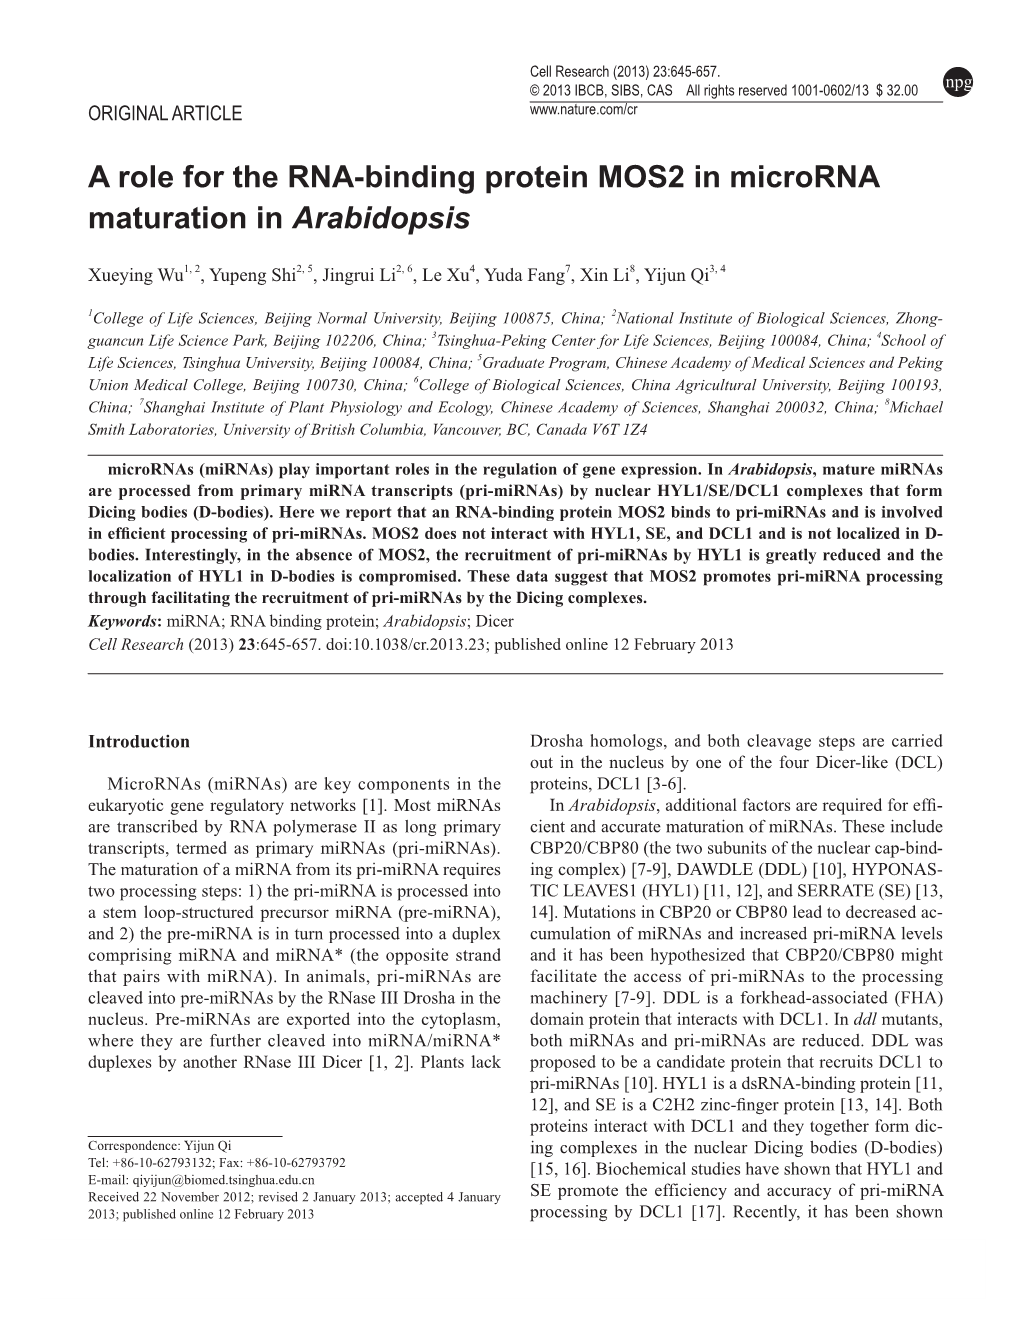 A Role for the RNA-Binding Protein MOS2 in Microrna Maturation in Arabidopsis